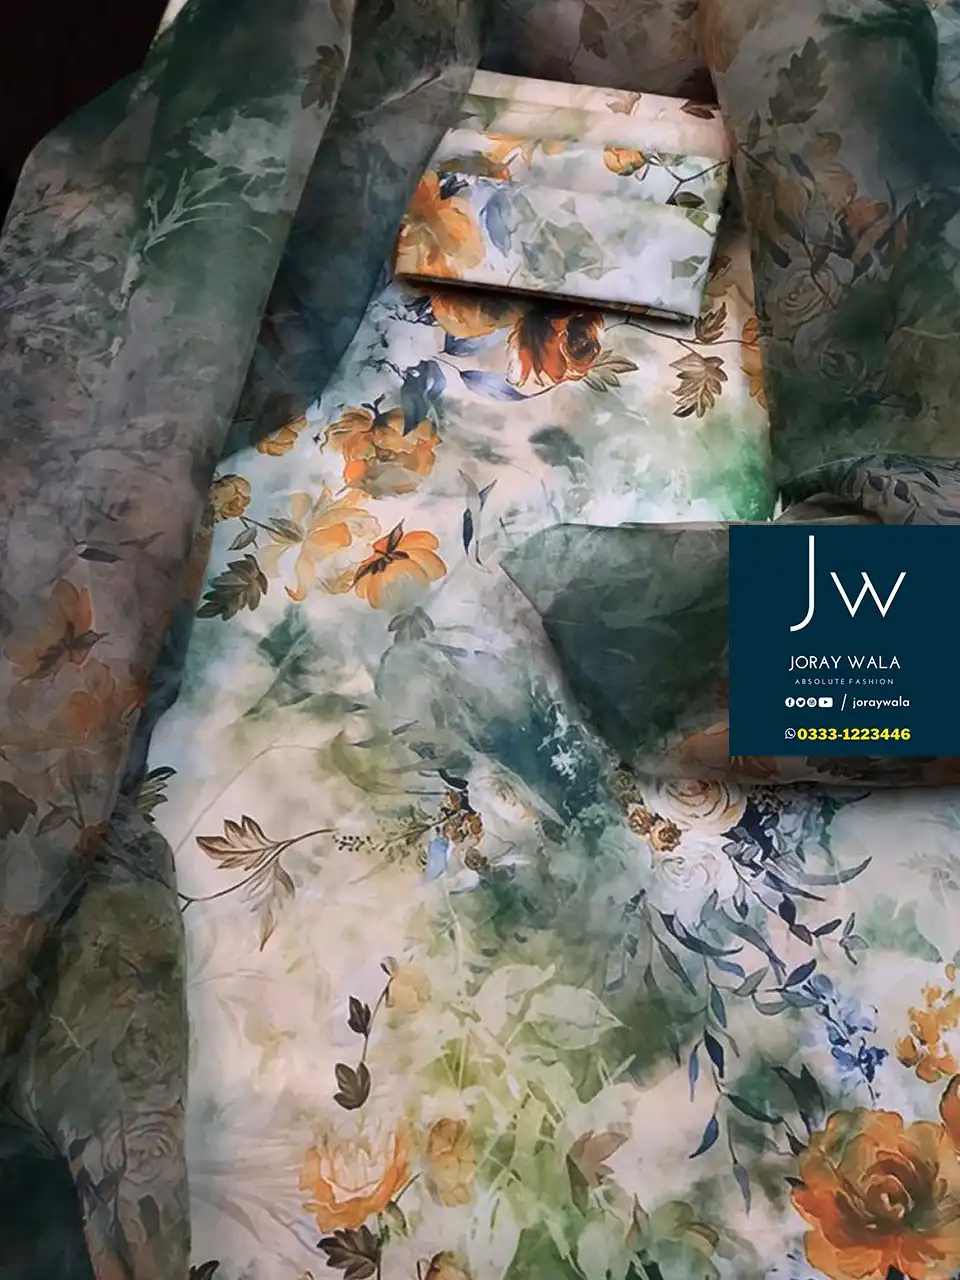 Digital Printed Swiss Lawn D21 with organza dupatta. free delivery available at joraywala